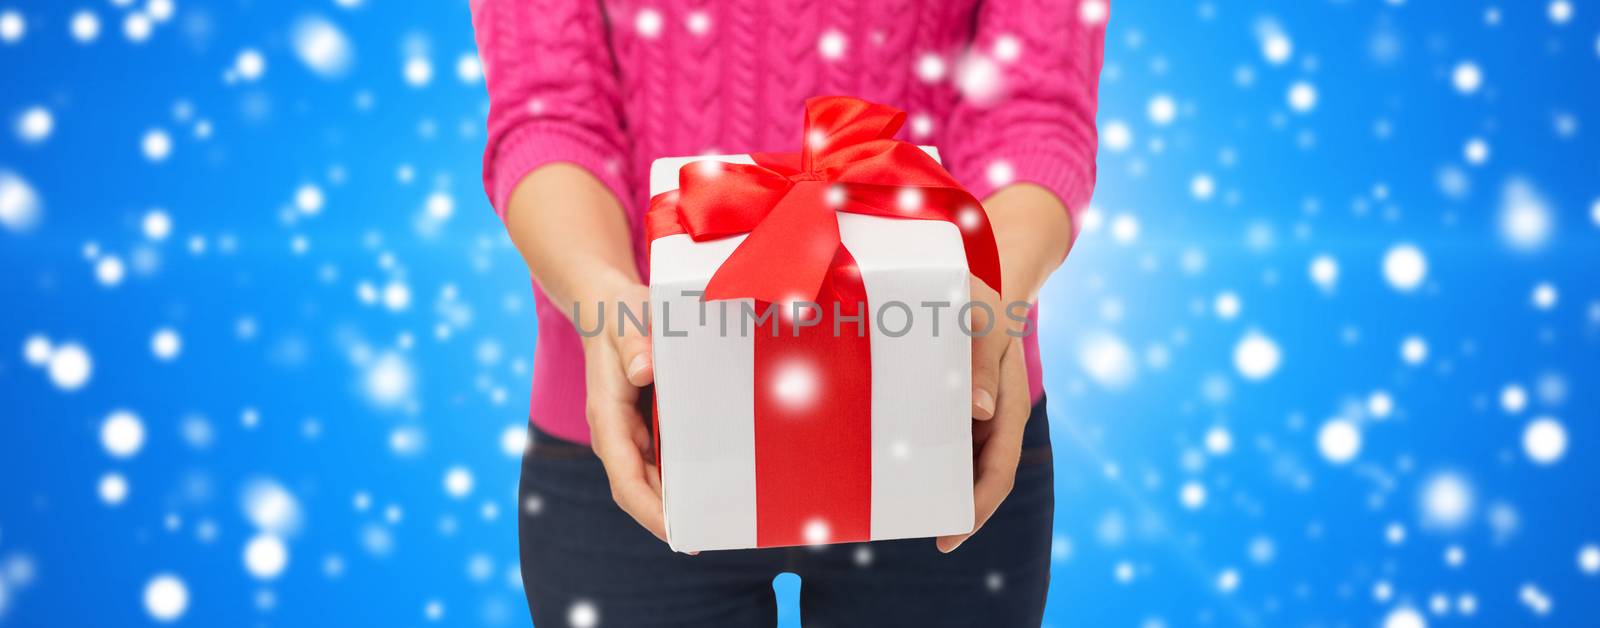 christmas, holidays and people concept - close up of woman in pink sweater holding gift box over blue snowy background